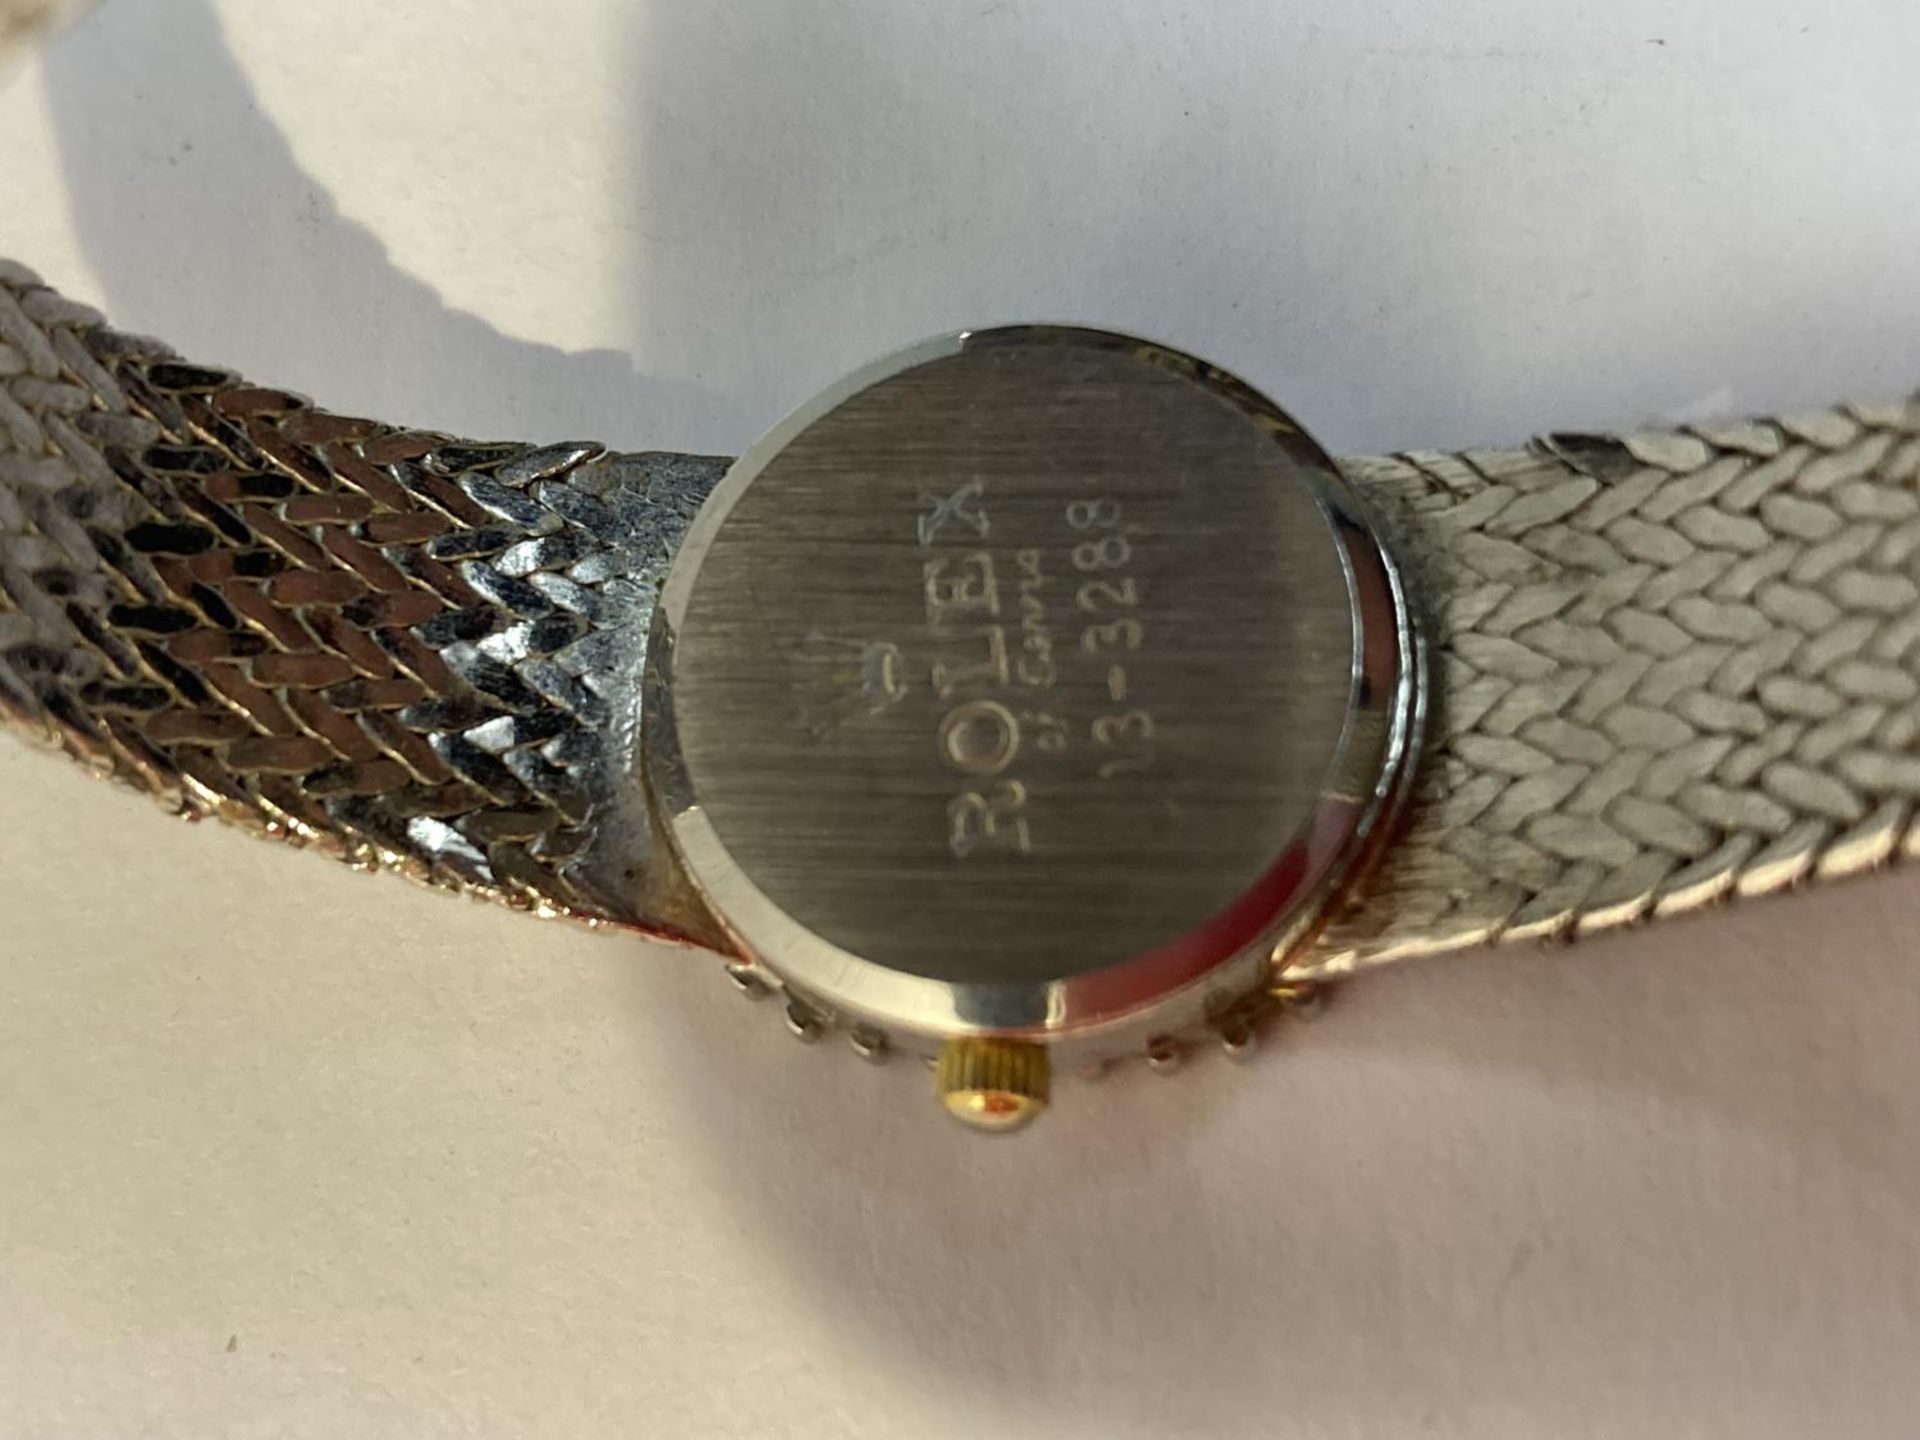 A LADIES FASHION WRIST WATCH SEEN WORKING BUT NO WARRANTY GIVEN - Image 4 of 7